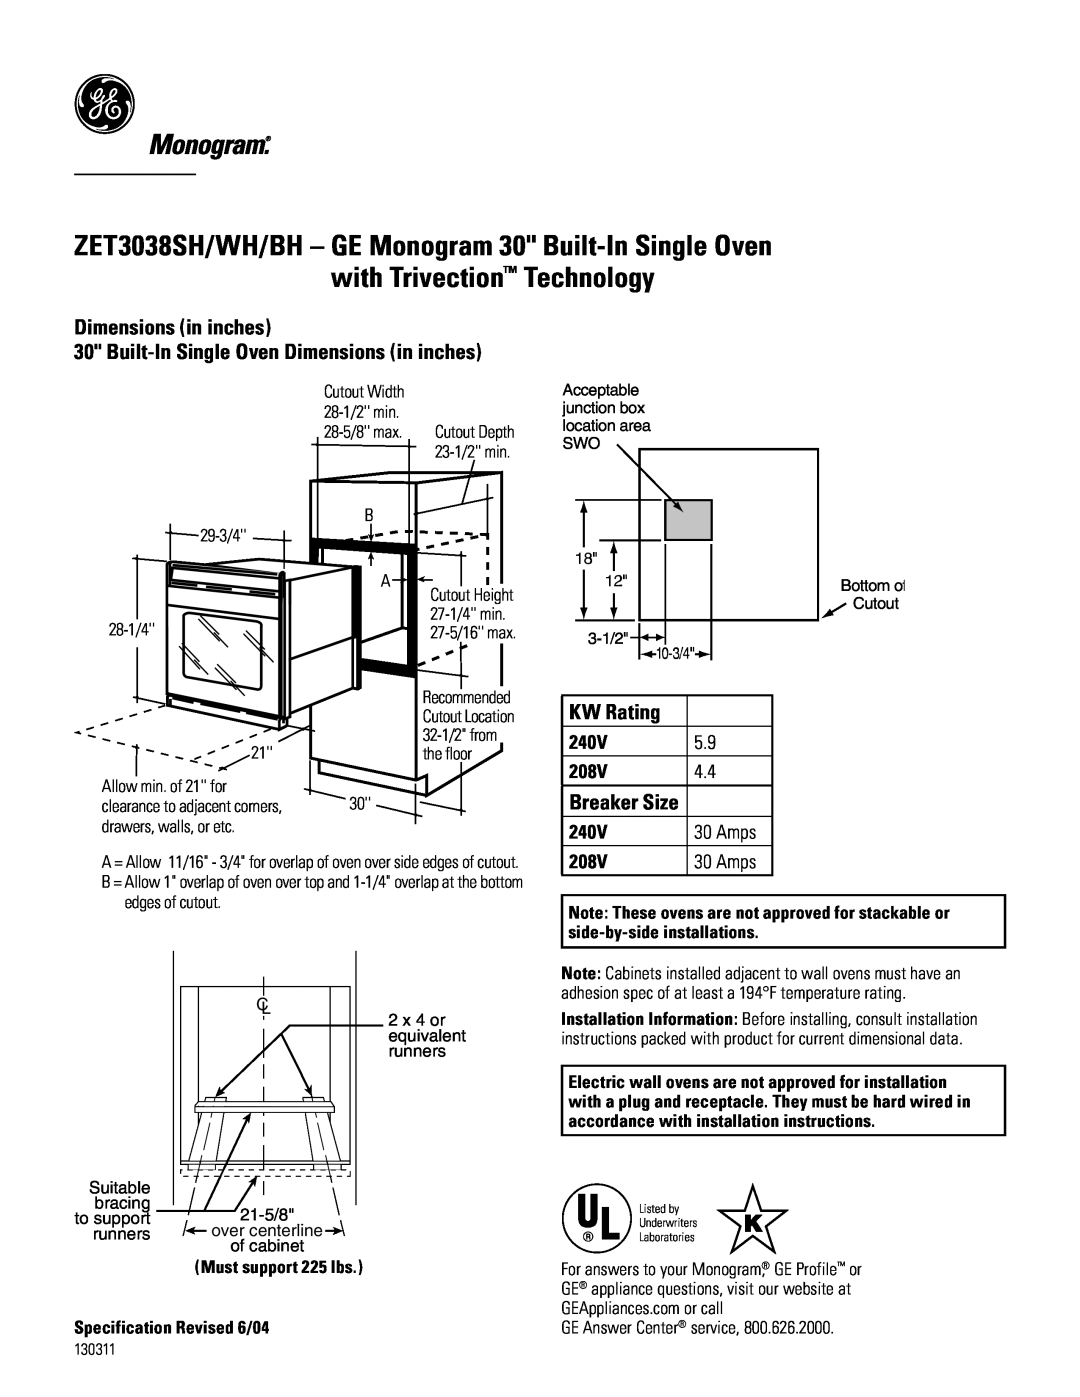 GE Monogram ZET3038SH/WH/BH dimensions Dimensions in inches 30 Built-In Single Oven Dimensions in inches, KW Rating, 240V 